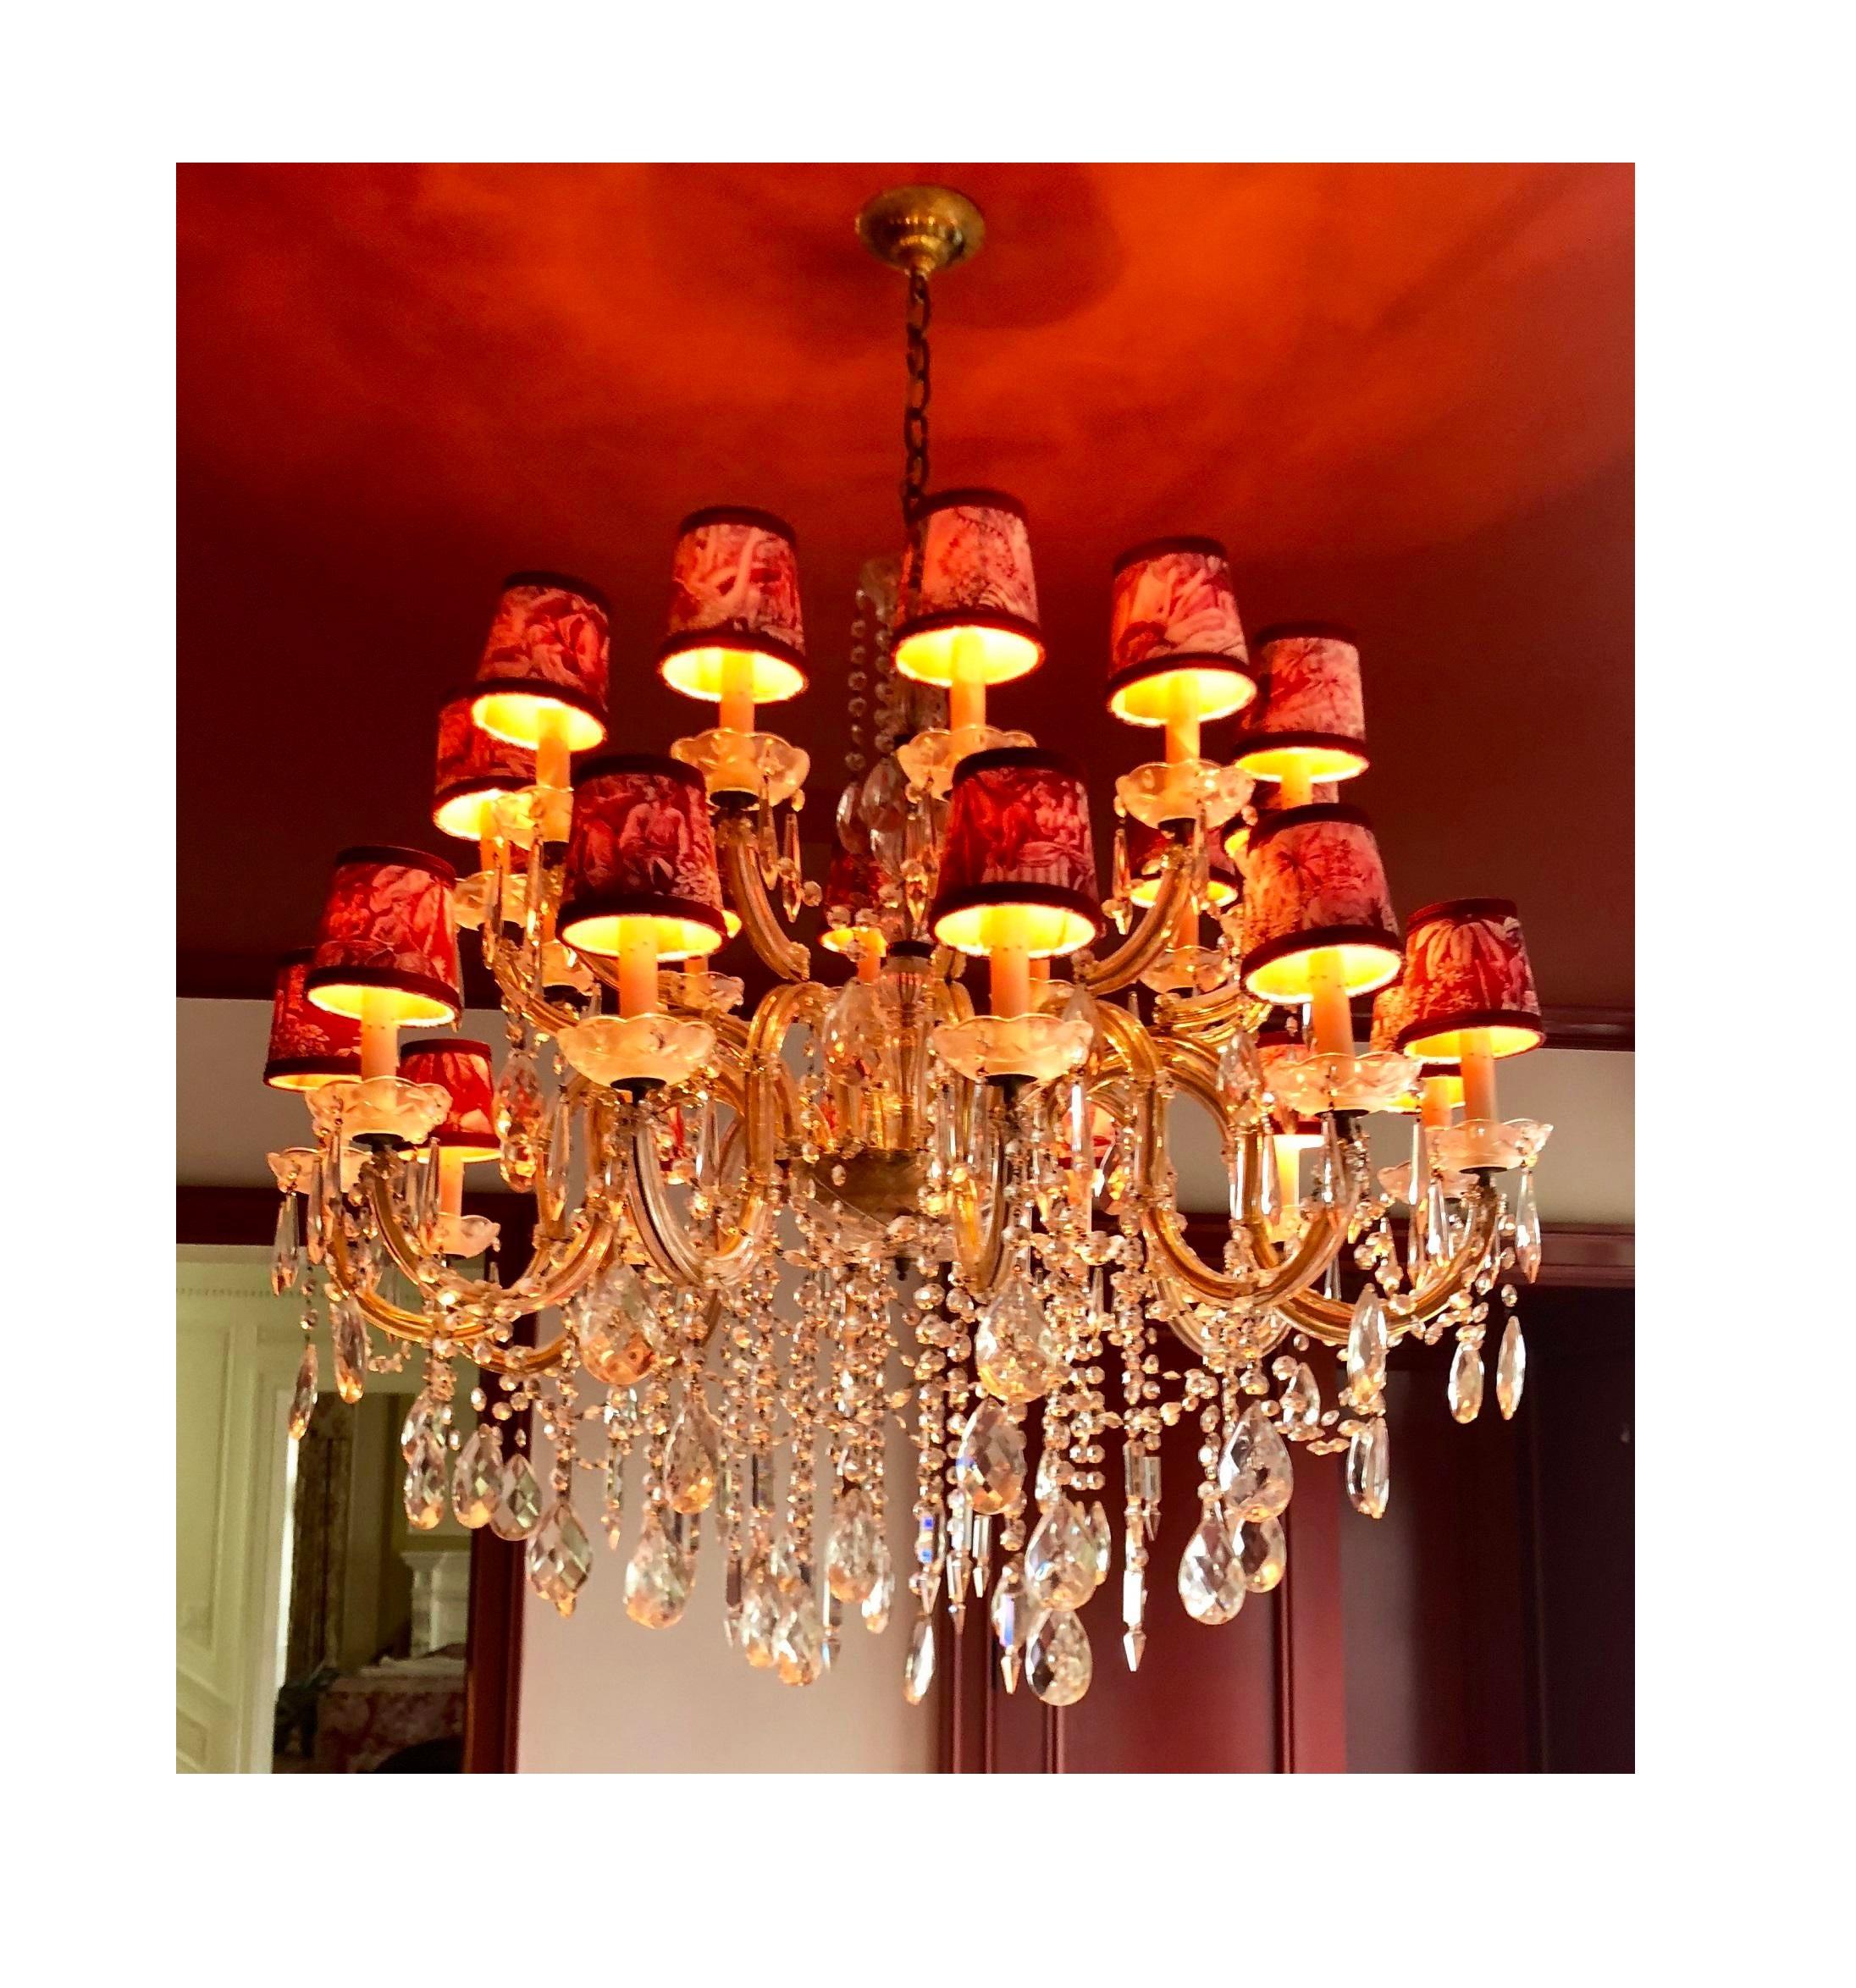 Louis XVI 24 Light French Crystal Chandelier with Manuel Canovas Toile Shades